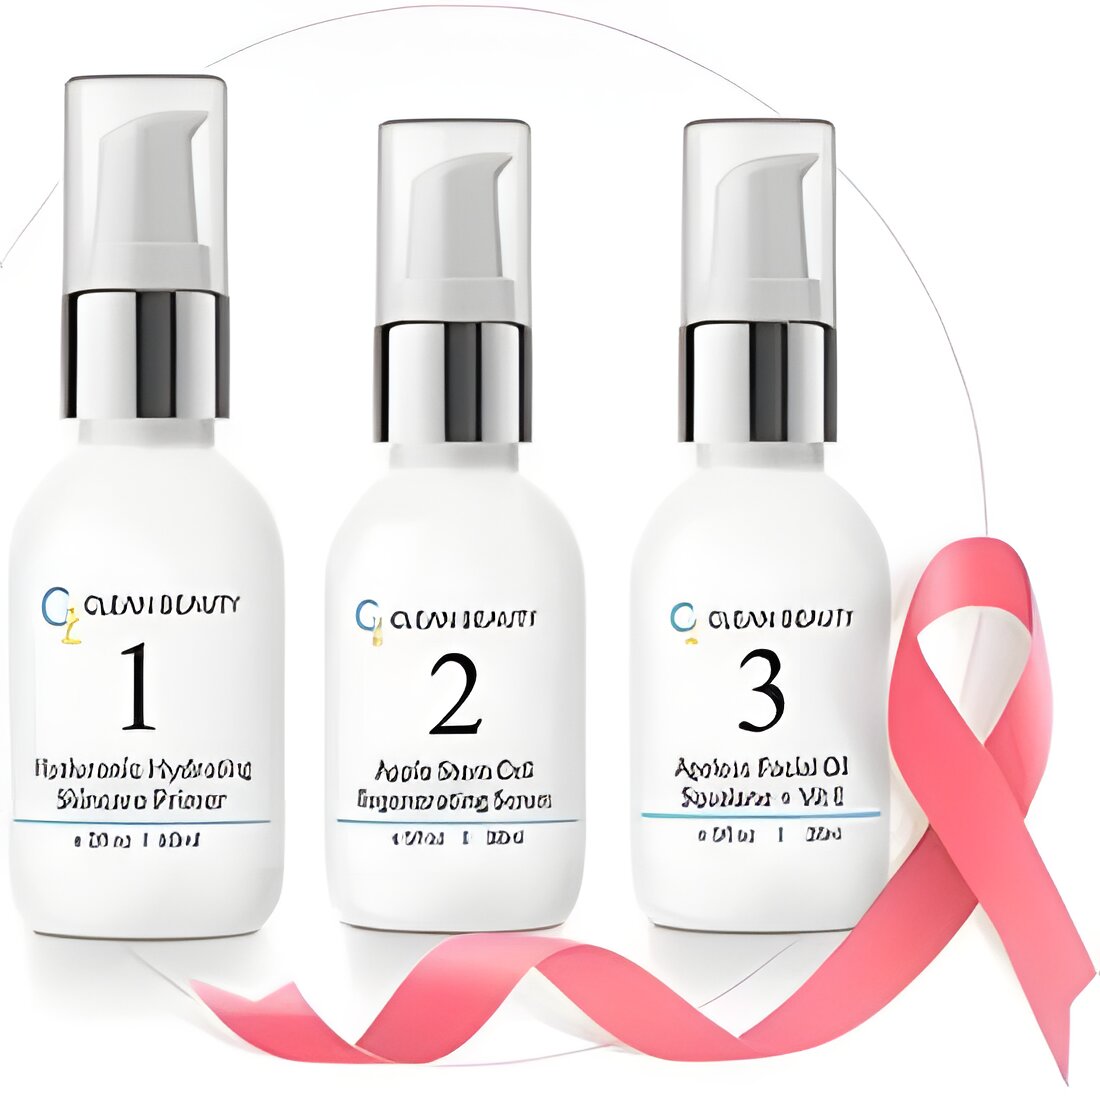 Free C2 Clean Beauty Skincare Samples